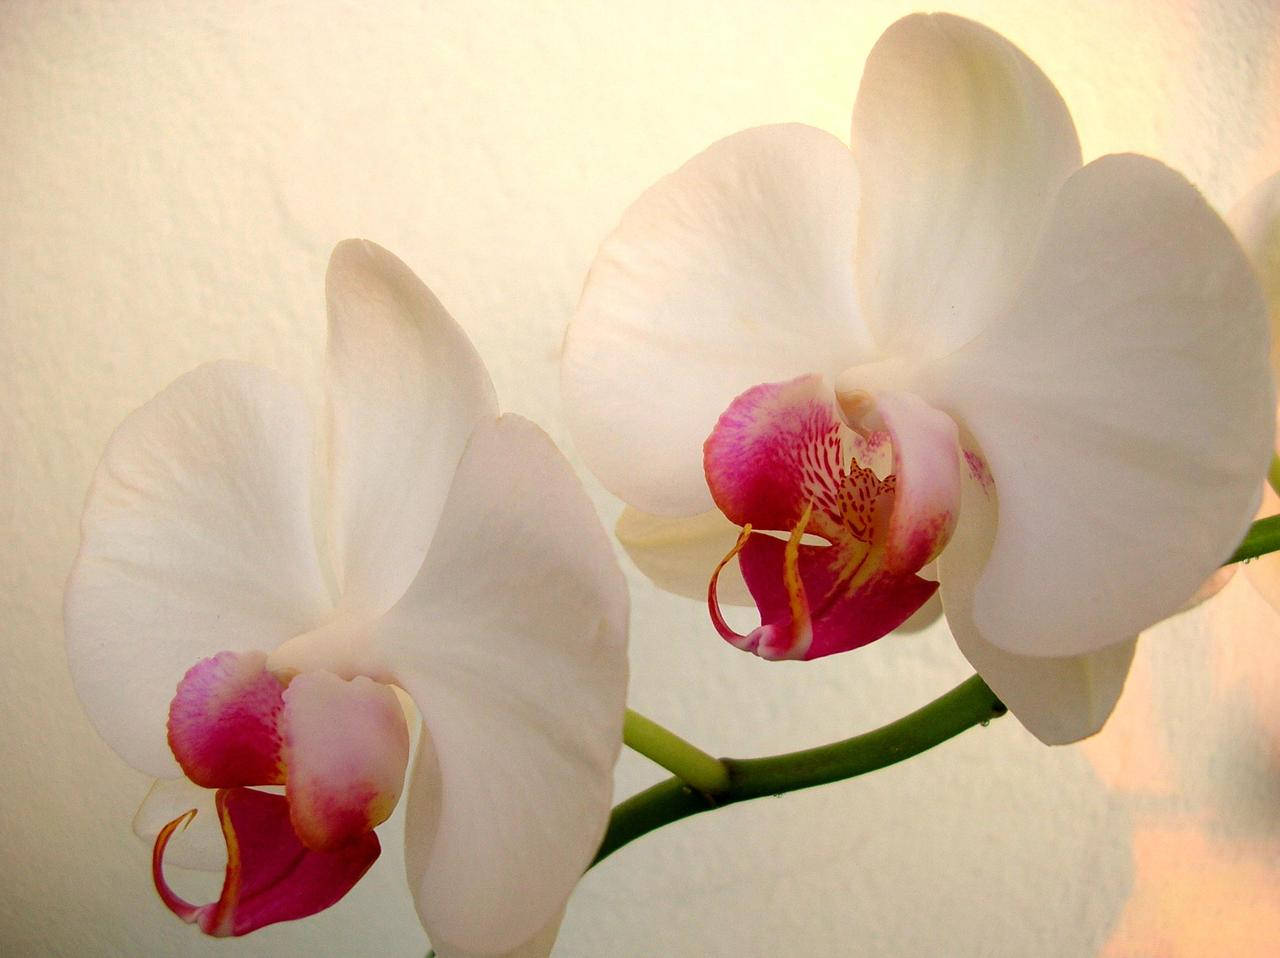 White Orchid With Pink Center Petals